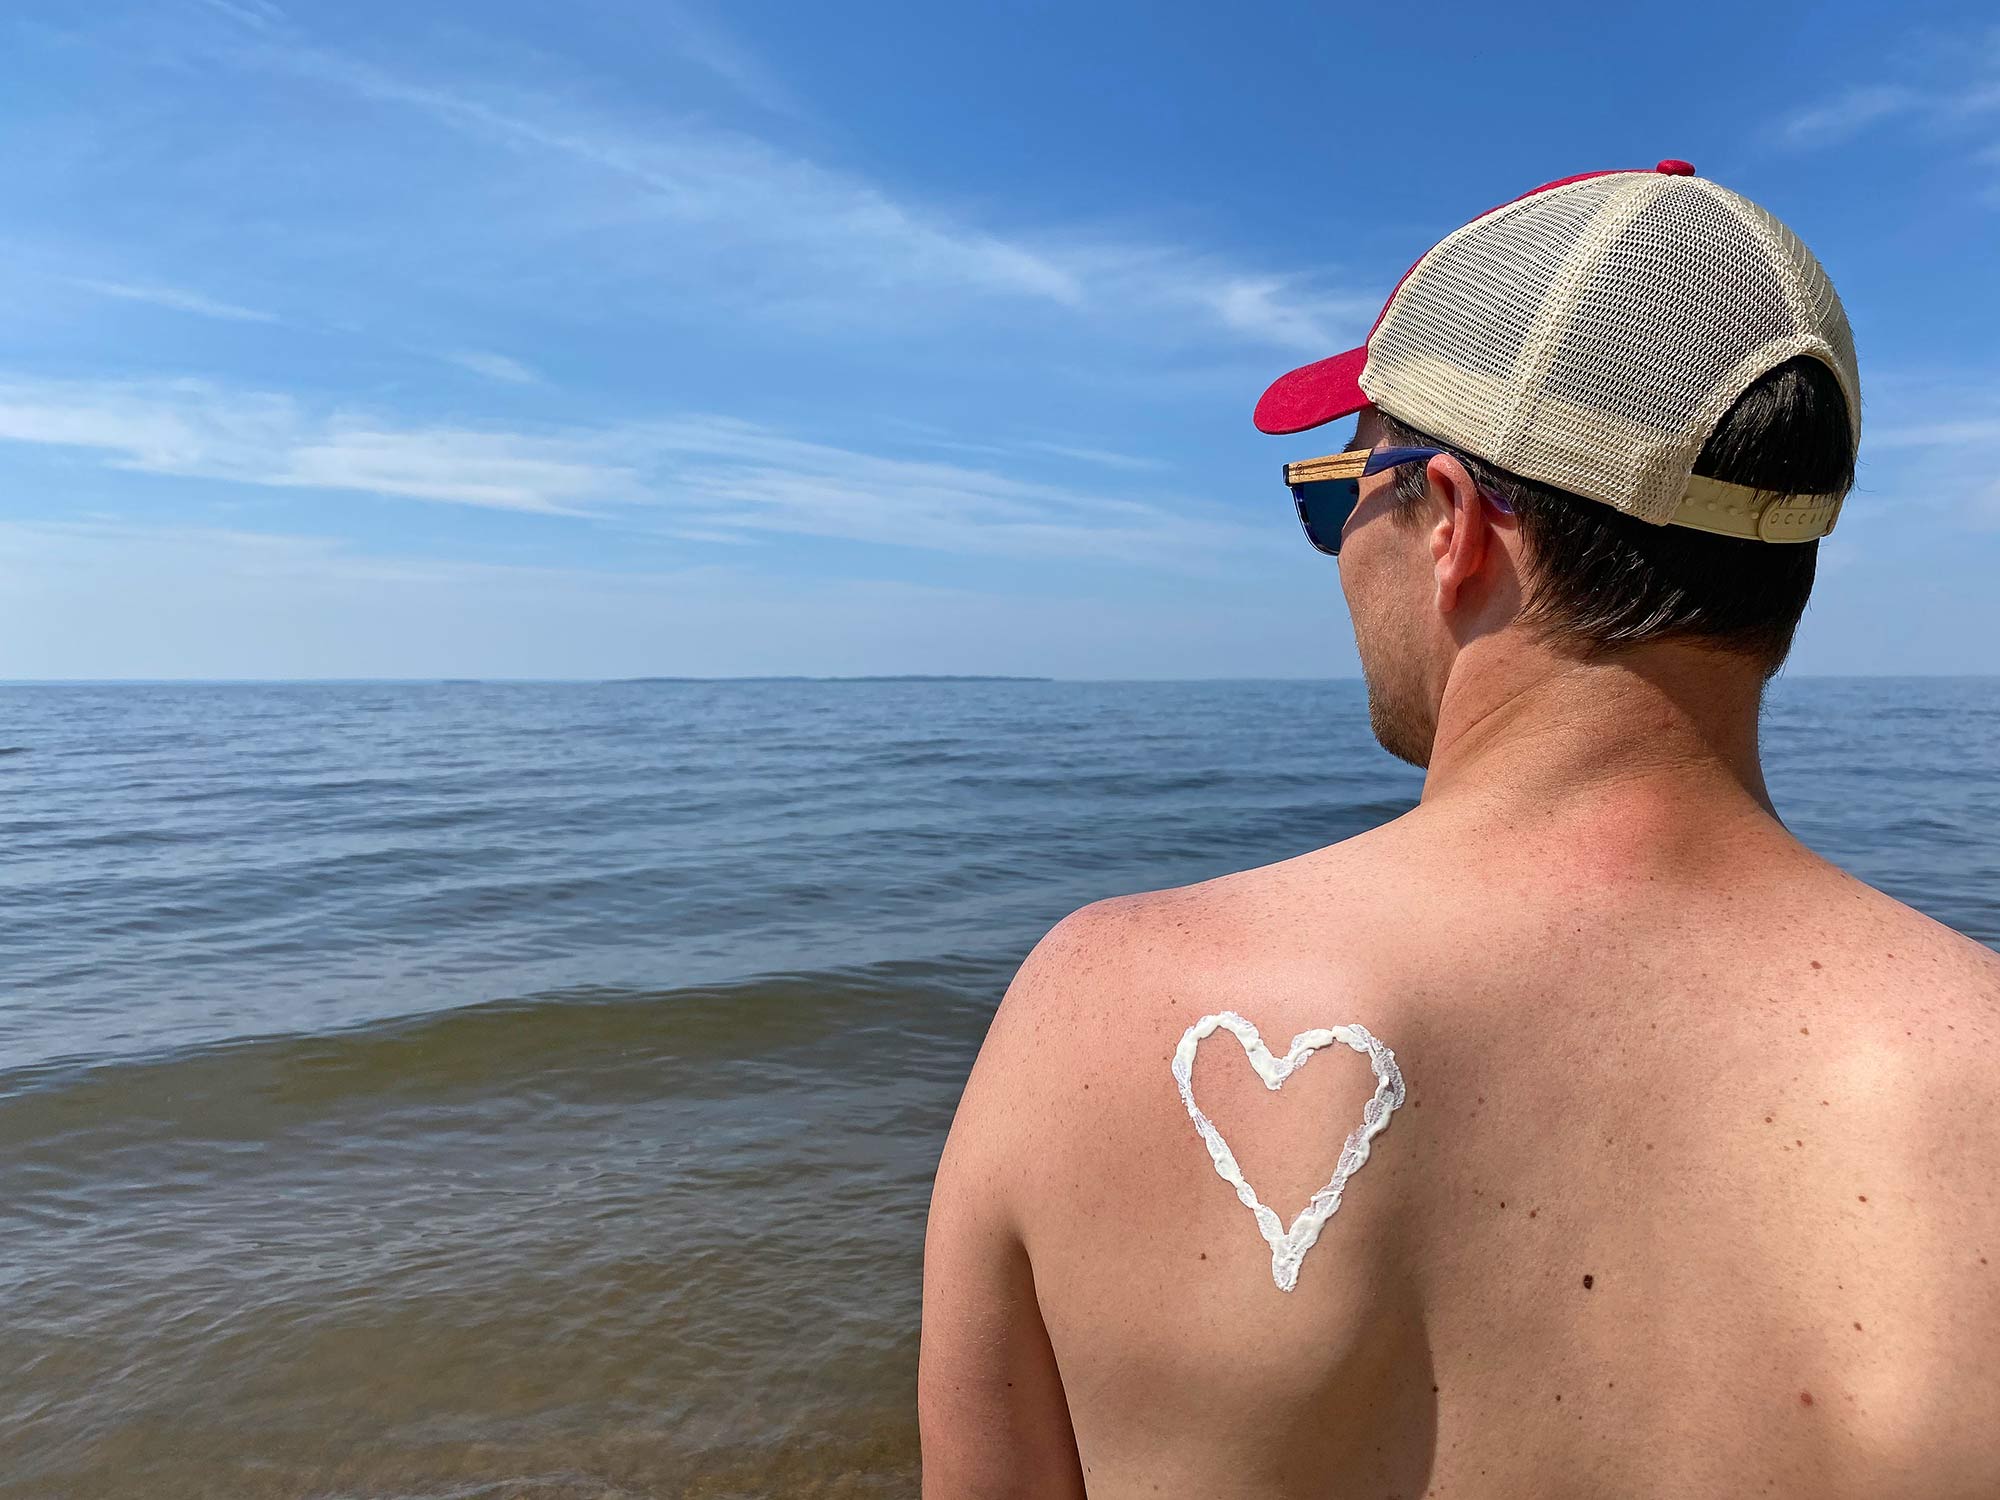 Joey Using Reef Safe Sunscreen While Hitting The Beaches In Northern Ontario, Canada